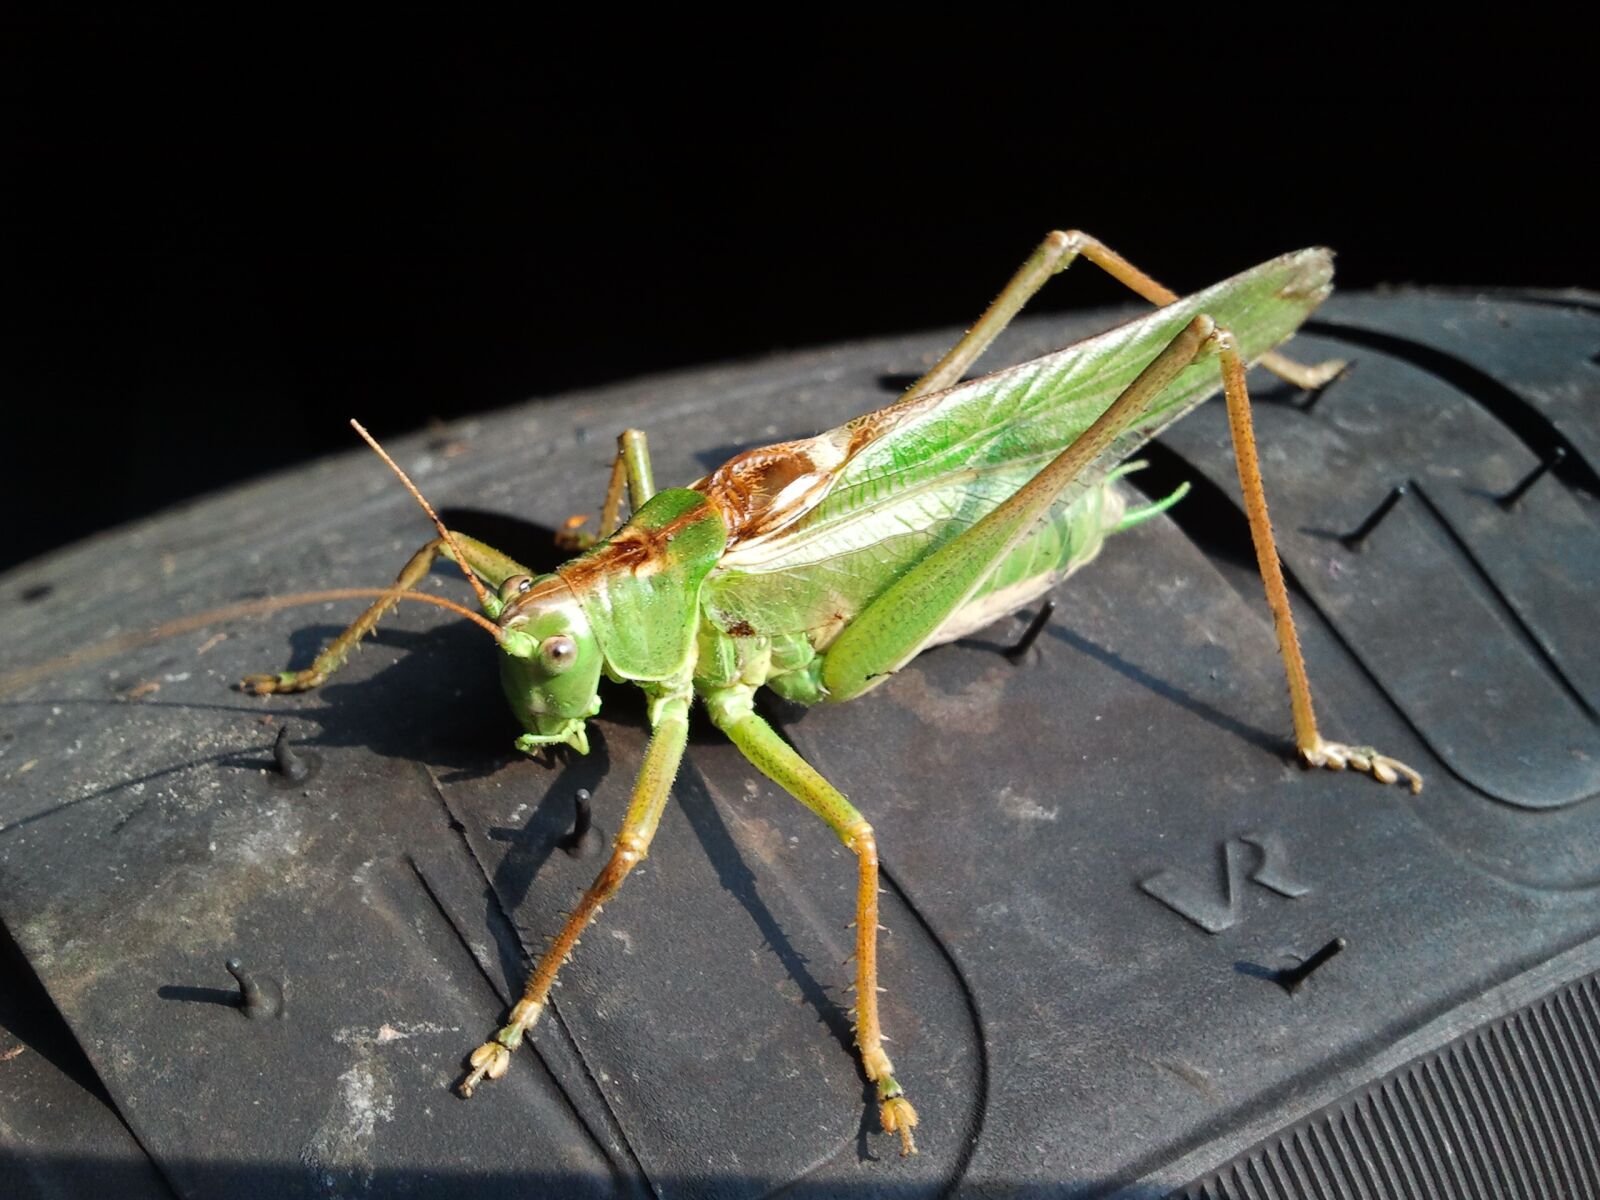 Samsung Galaxy S Plus sample photo. Grasshopper, sun, insect photography